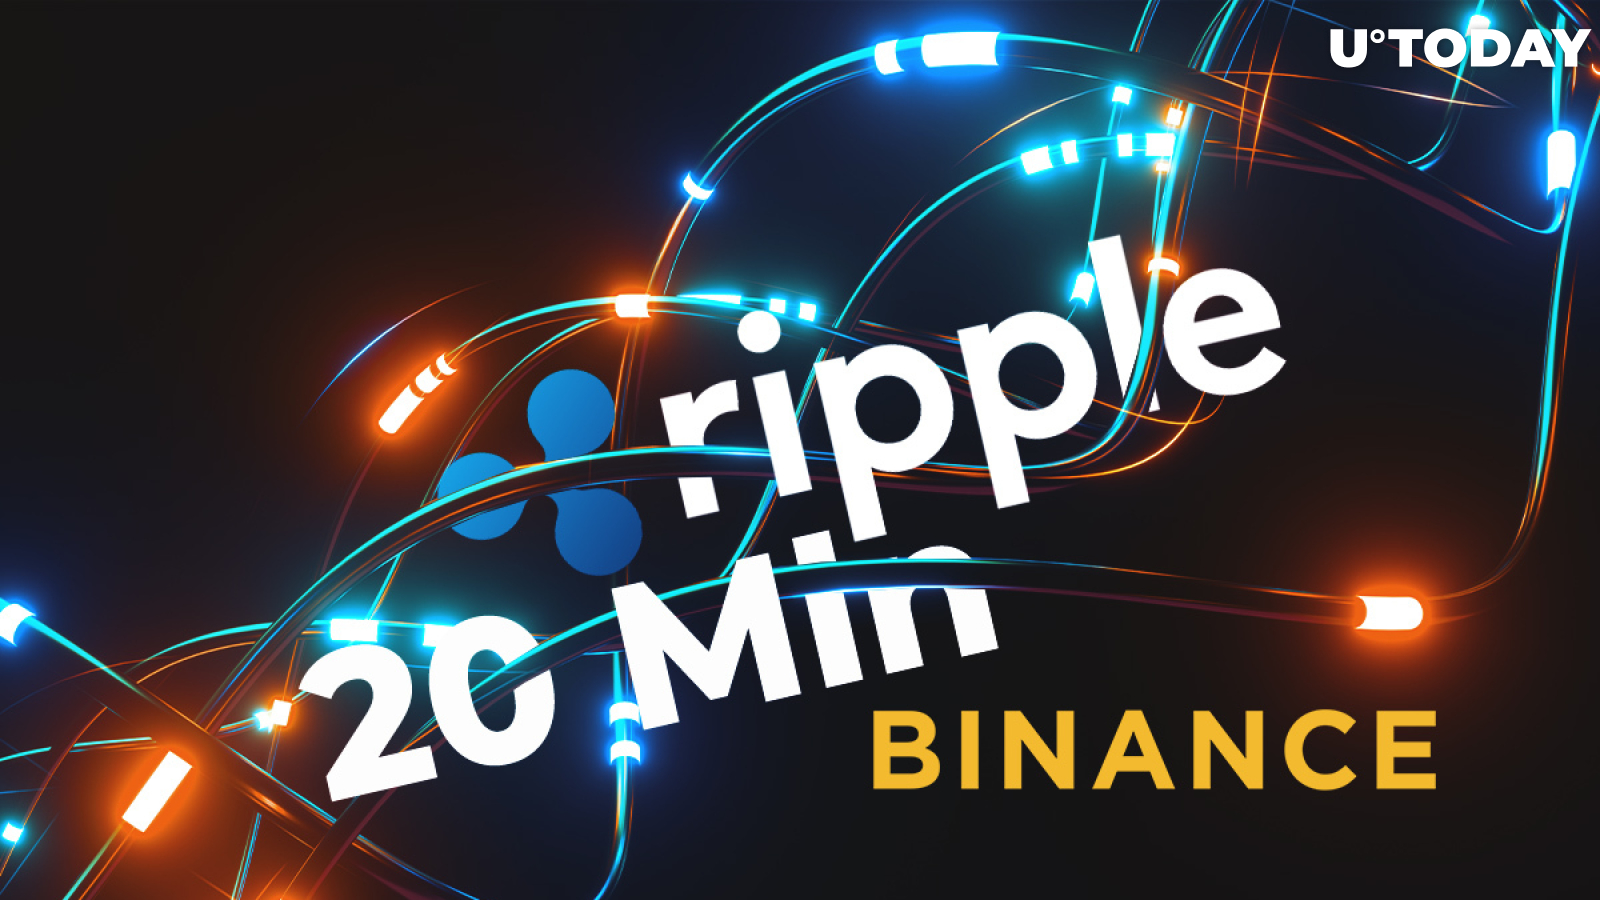 Ripple Sends 20 Mln XRP to Binance and Gets Half of It Back